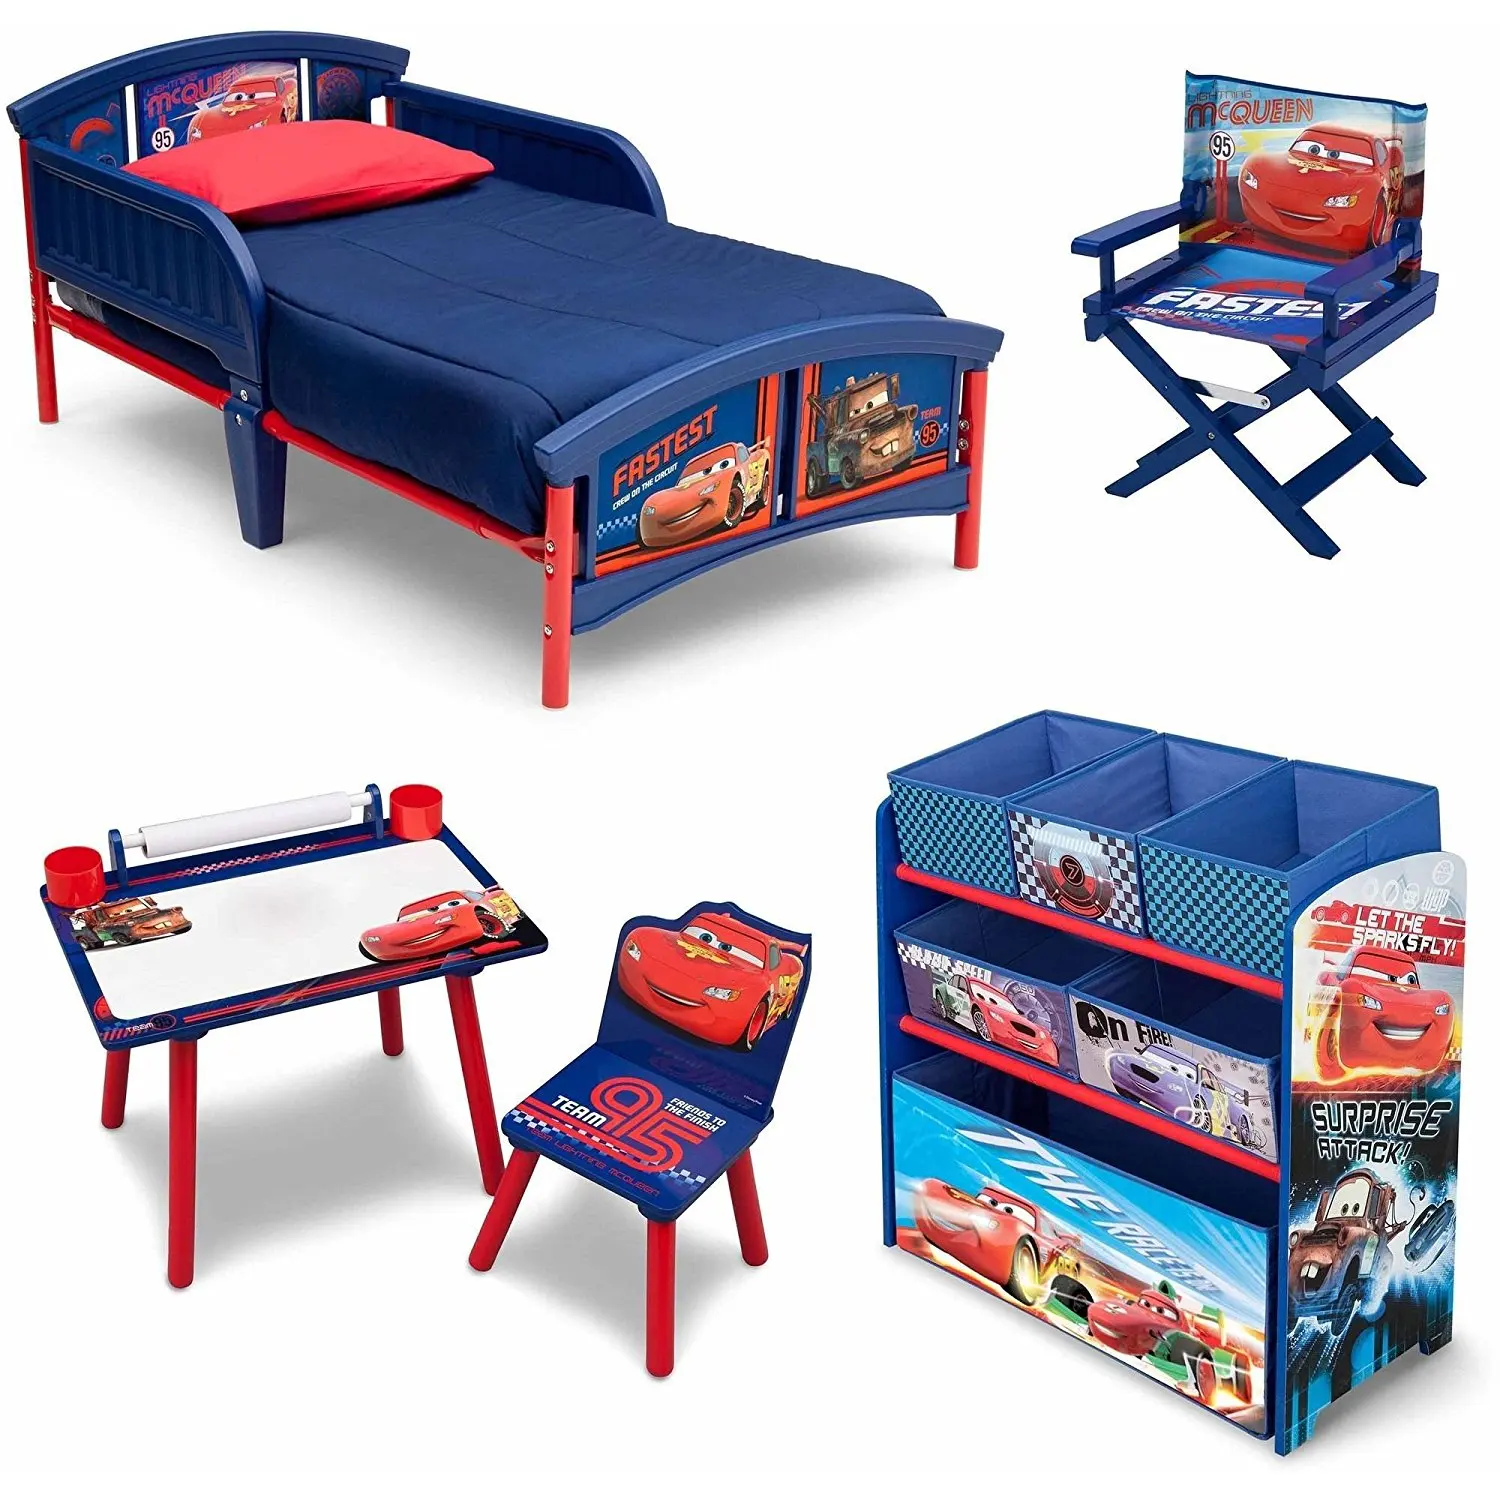 Buy New 5 Set Room In A Box Toddler Bed With Safety Rails